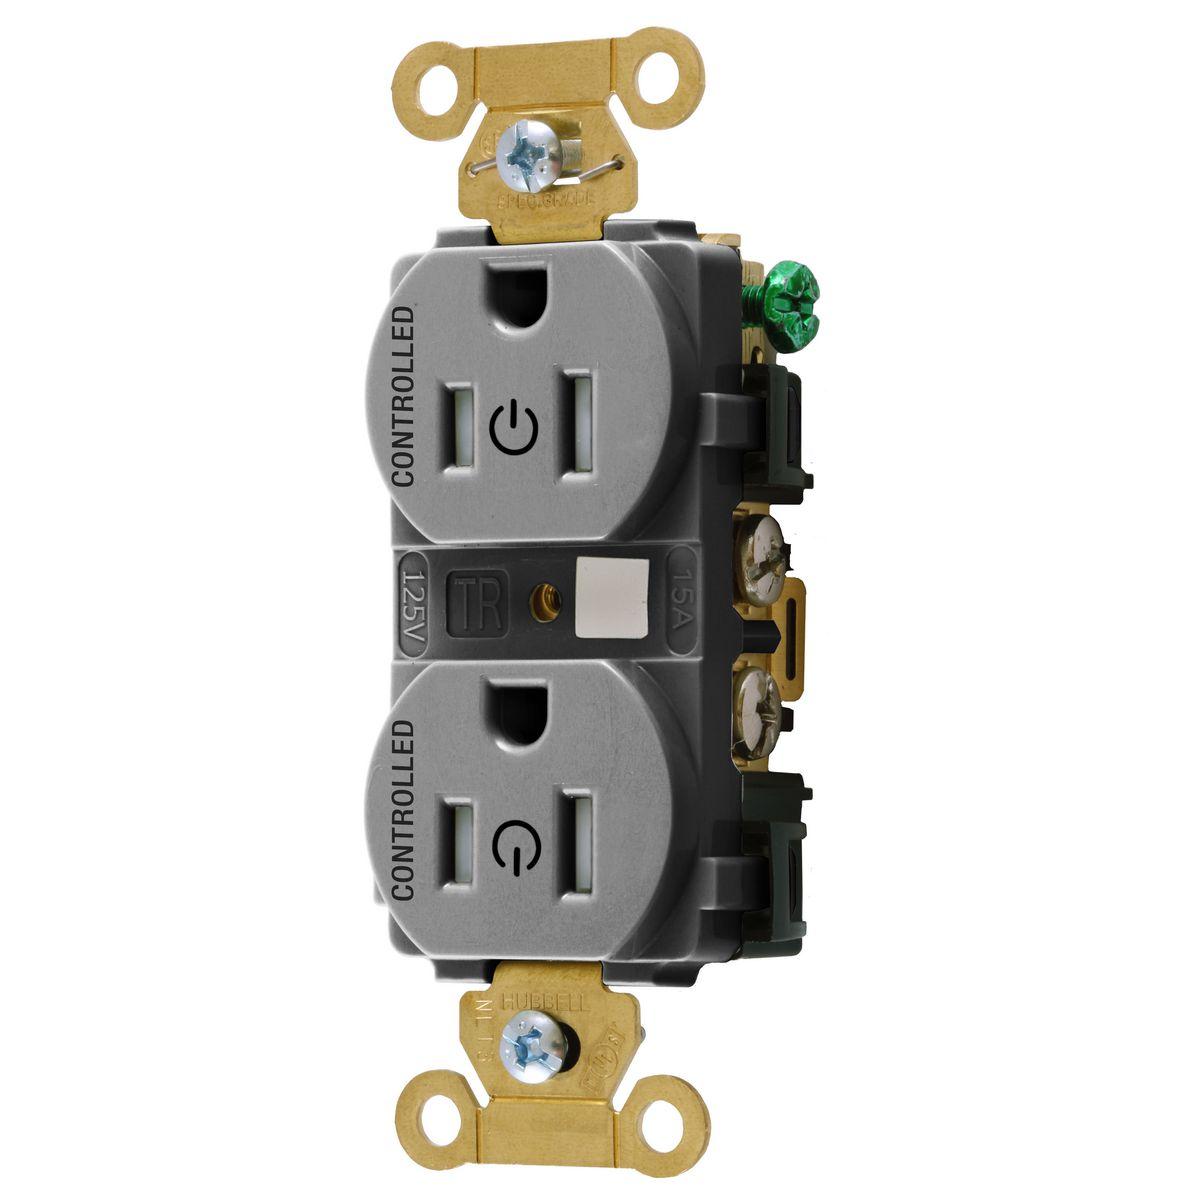 Hubbell HBL5262C2GRYTR Straight Blade Devices,Extra Heavy Duty Standard Duplex Receptacles for Controlled Applications , Fully Controlled,15A, 125V, 2 Pole, 3 Wire Grounding,Gray  ; Permanently marked with universal power symbol and the word "CONTROLLED" to visually identify re